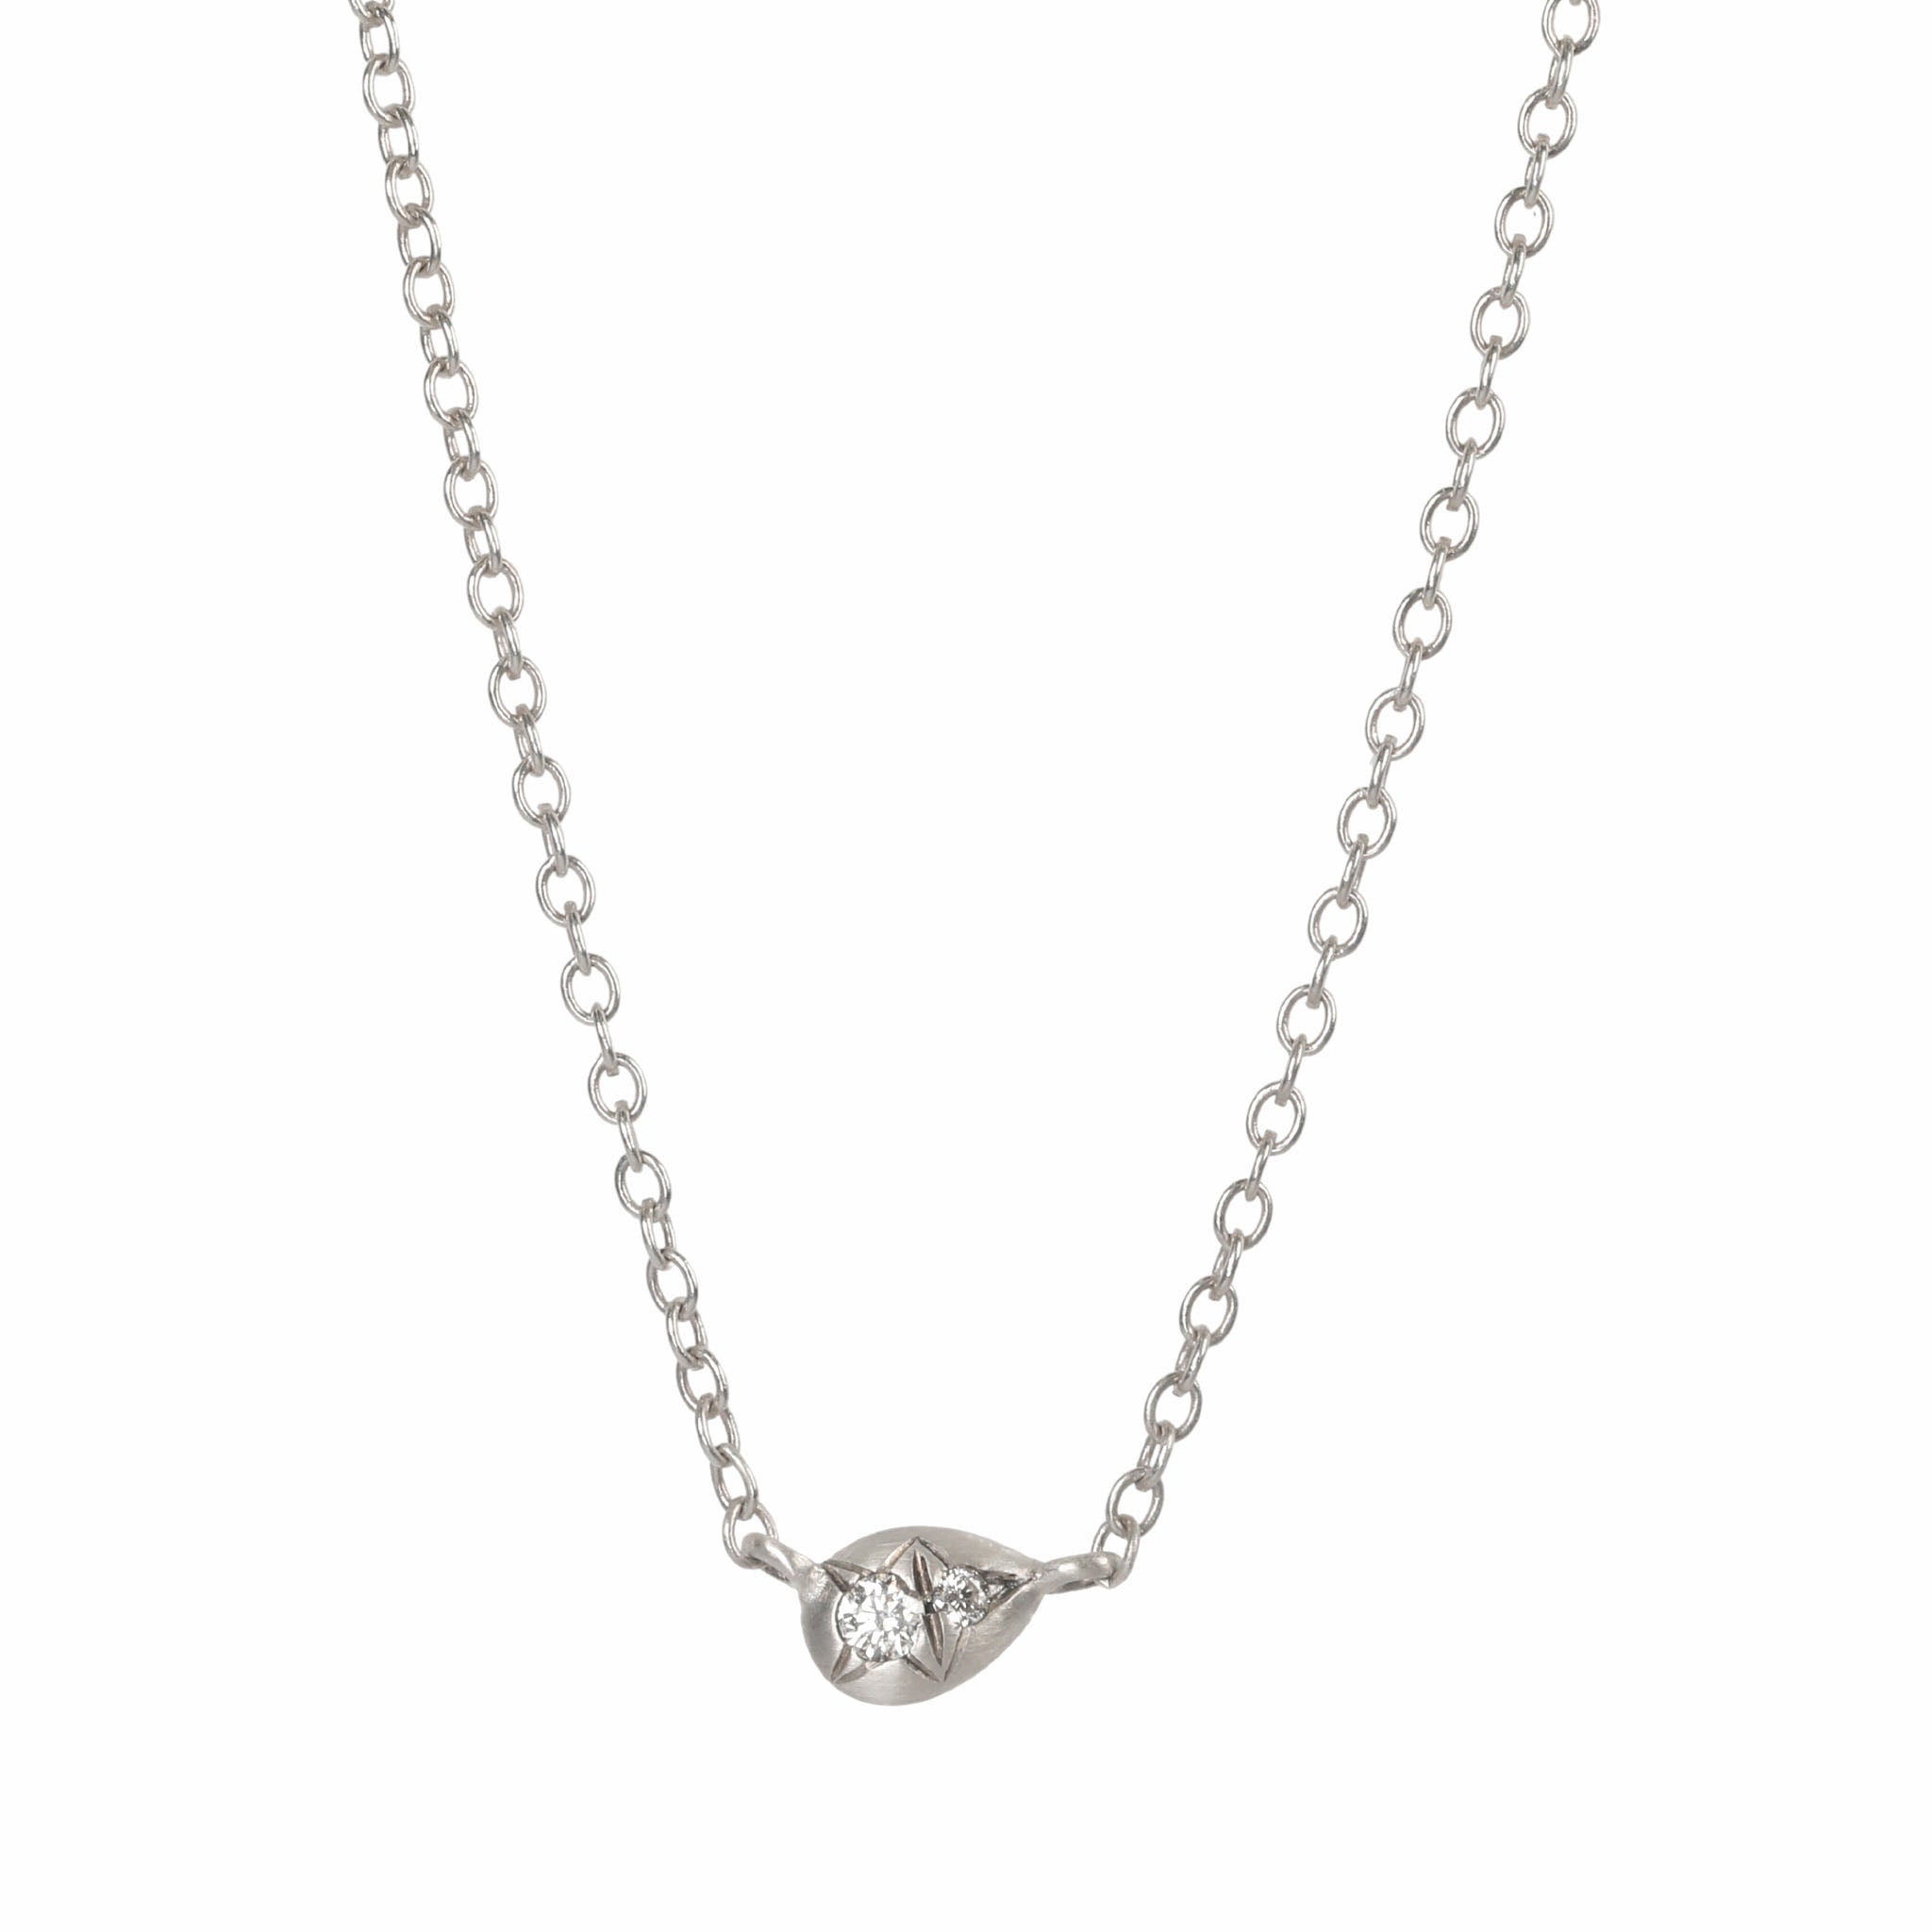 Sterling Silver Off-Set Pear-Shaped Disc Pendant Necklace with Two Star-Set Diamonds